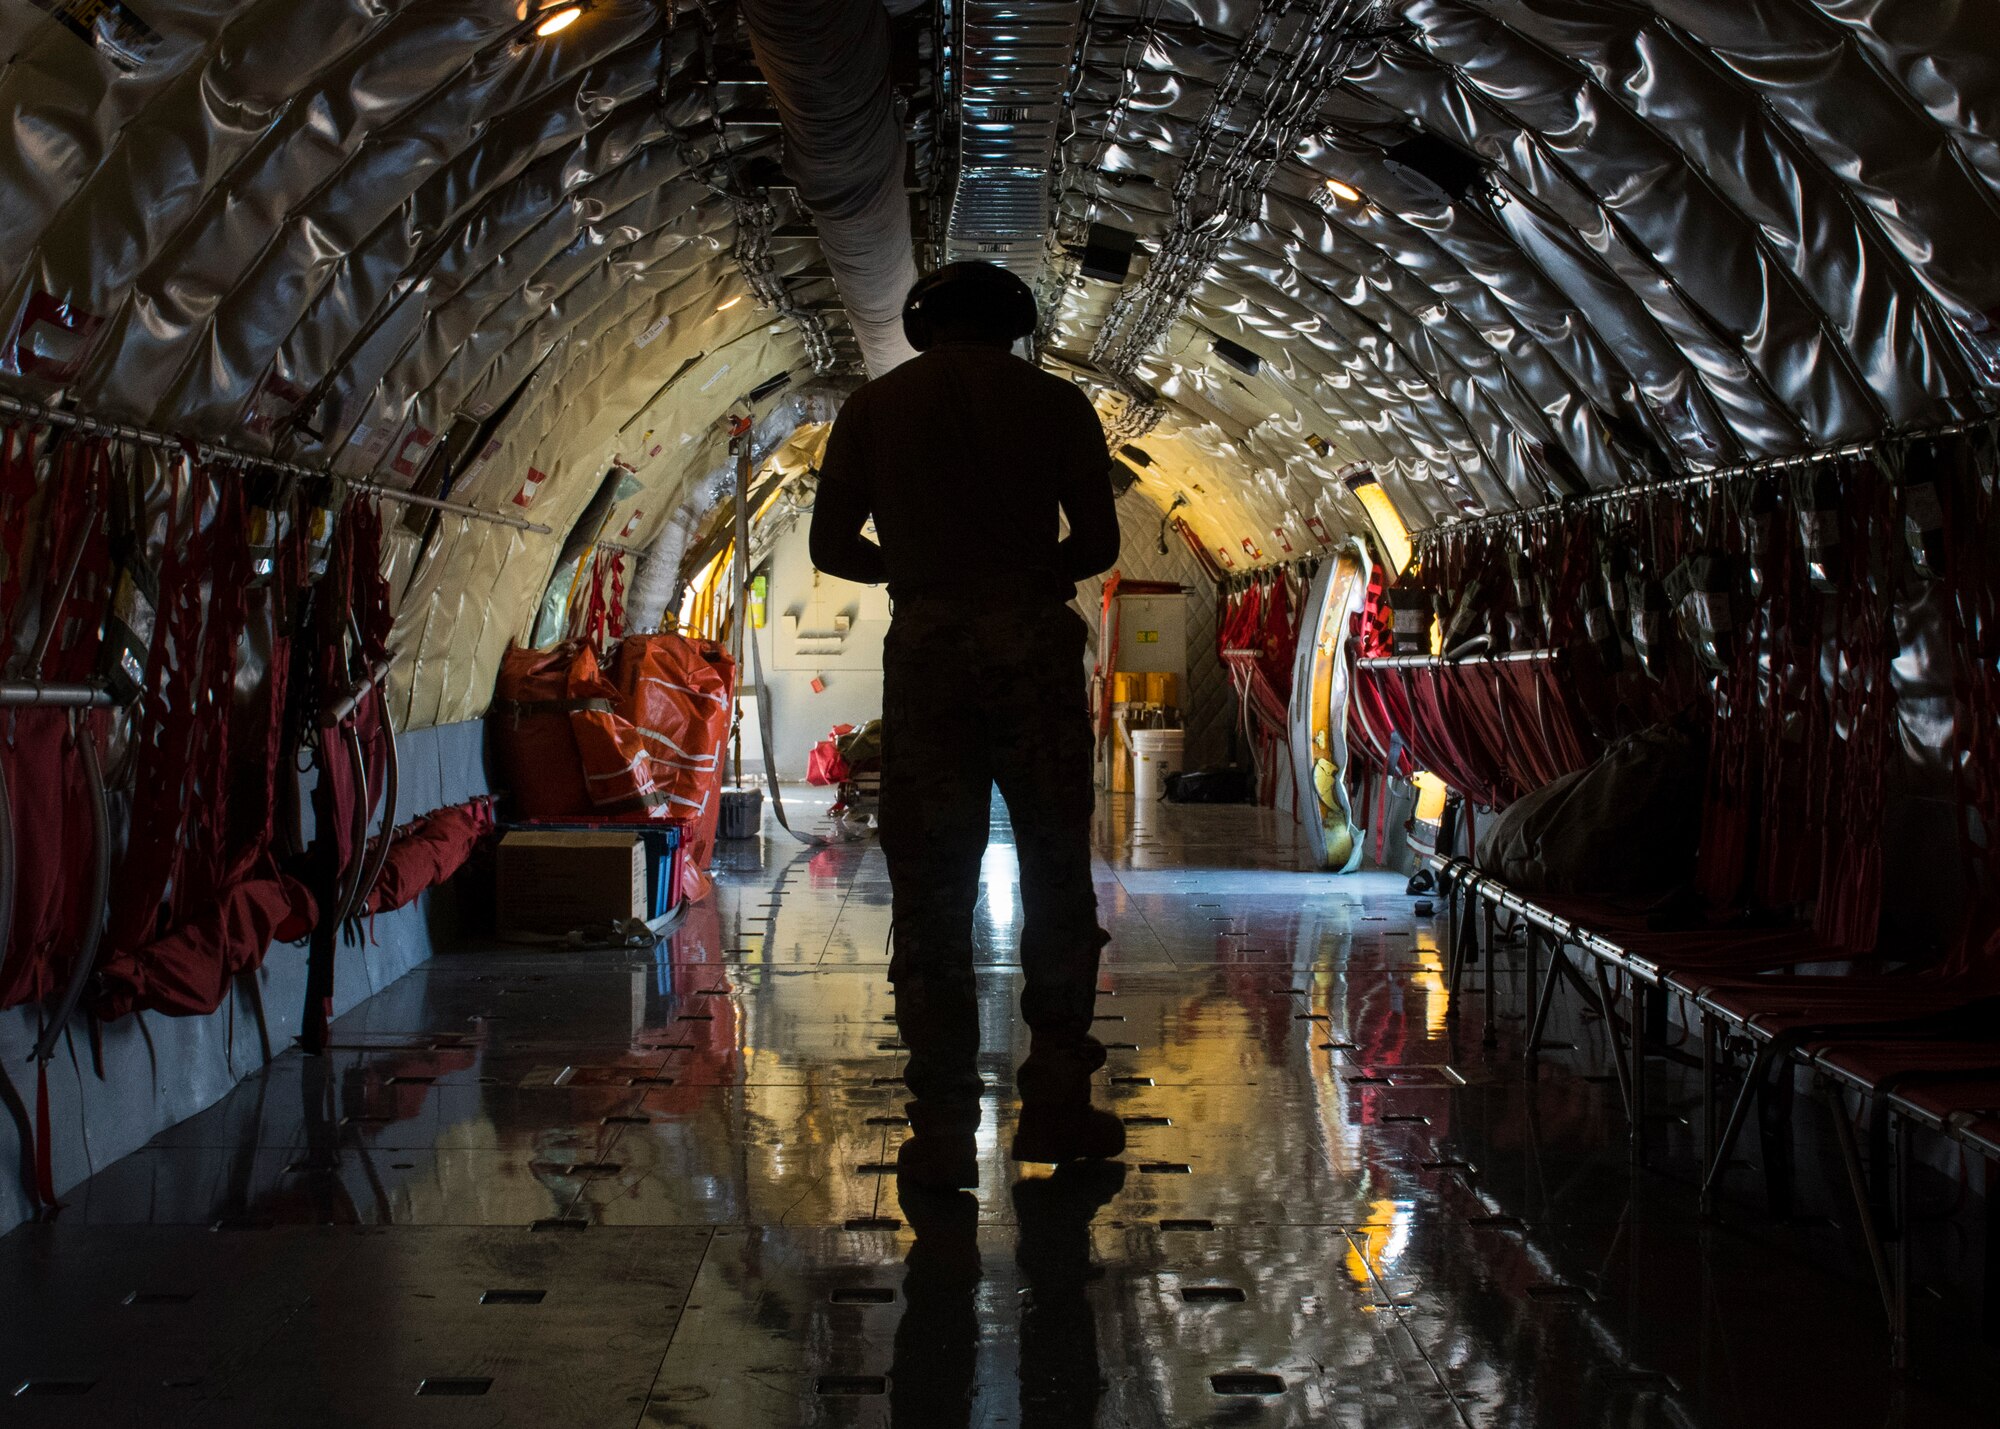 U.S. Air Force Airman 1st Class Jaden Allen, 92nd Air Refueling Squadron boom operator, performs a pre-flight check on a KC-135 Stratotanker at Fairchild Air Force Base, Washington, July 29, 2020. Team Fairchild’s success in the implementation of Theory of Constraints and Continuous Process of Improvement tools set the standard for Project Tesseract’s success at other wings throughout the Air Force, and further enabled Fairchild Airmen to continue to innovate and solve the problems they know best. (U.S. Air Force photo by Senior Airman Lawrence Sena)